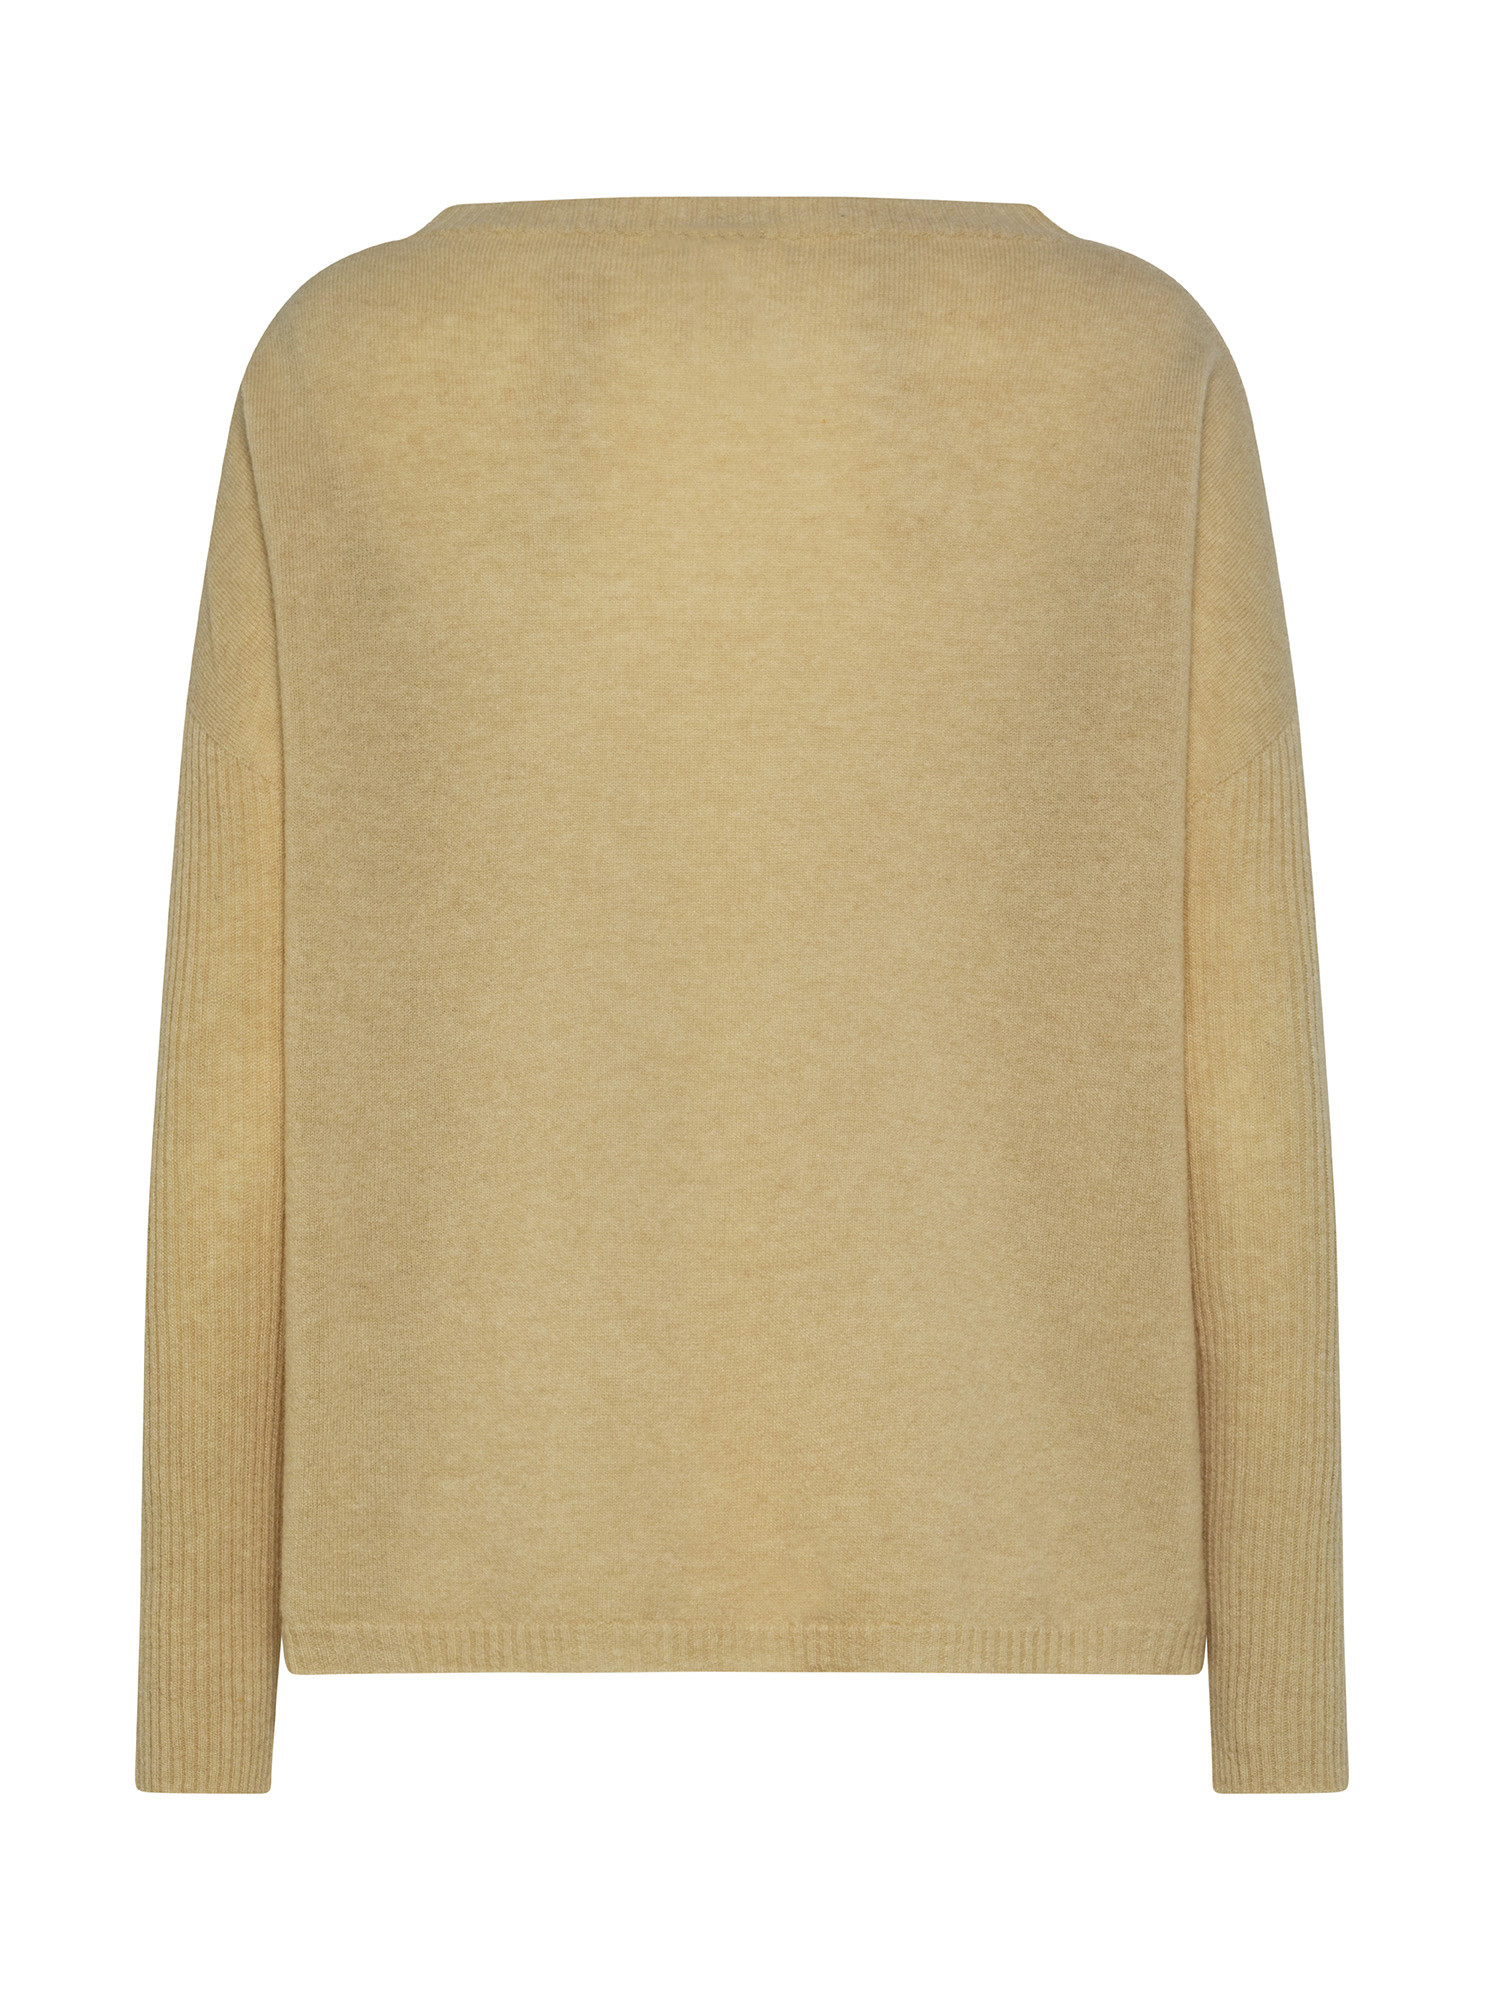 K Collection - Maglia girocollo, Beige, large image number 1